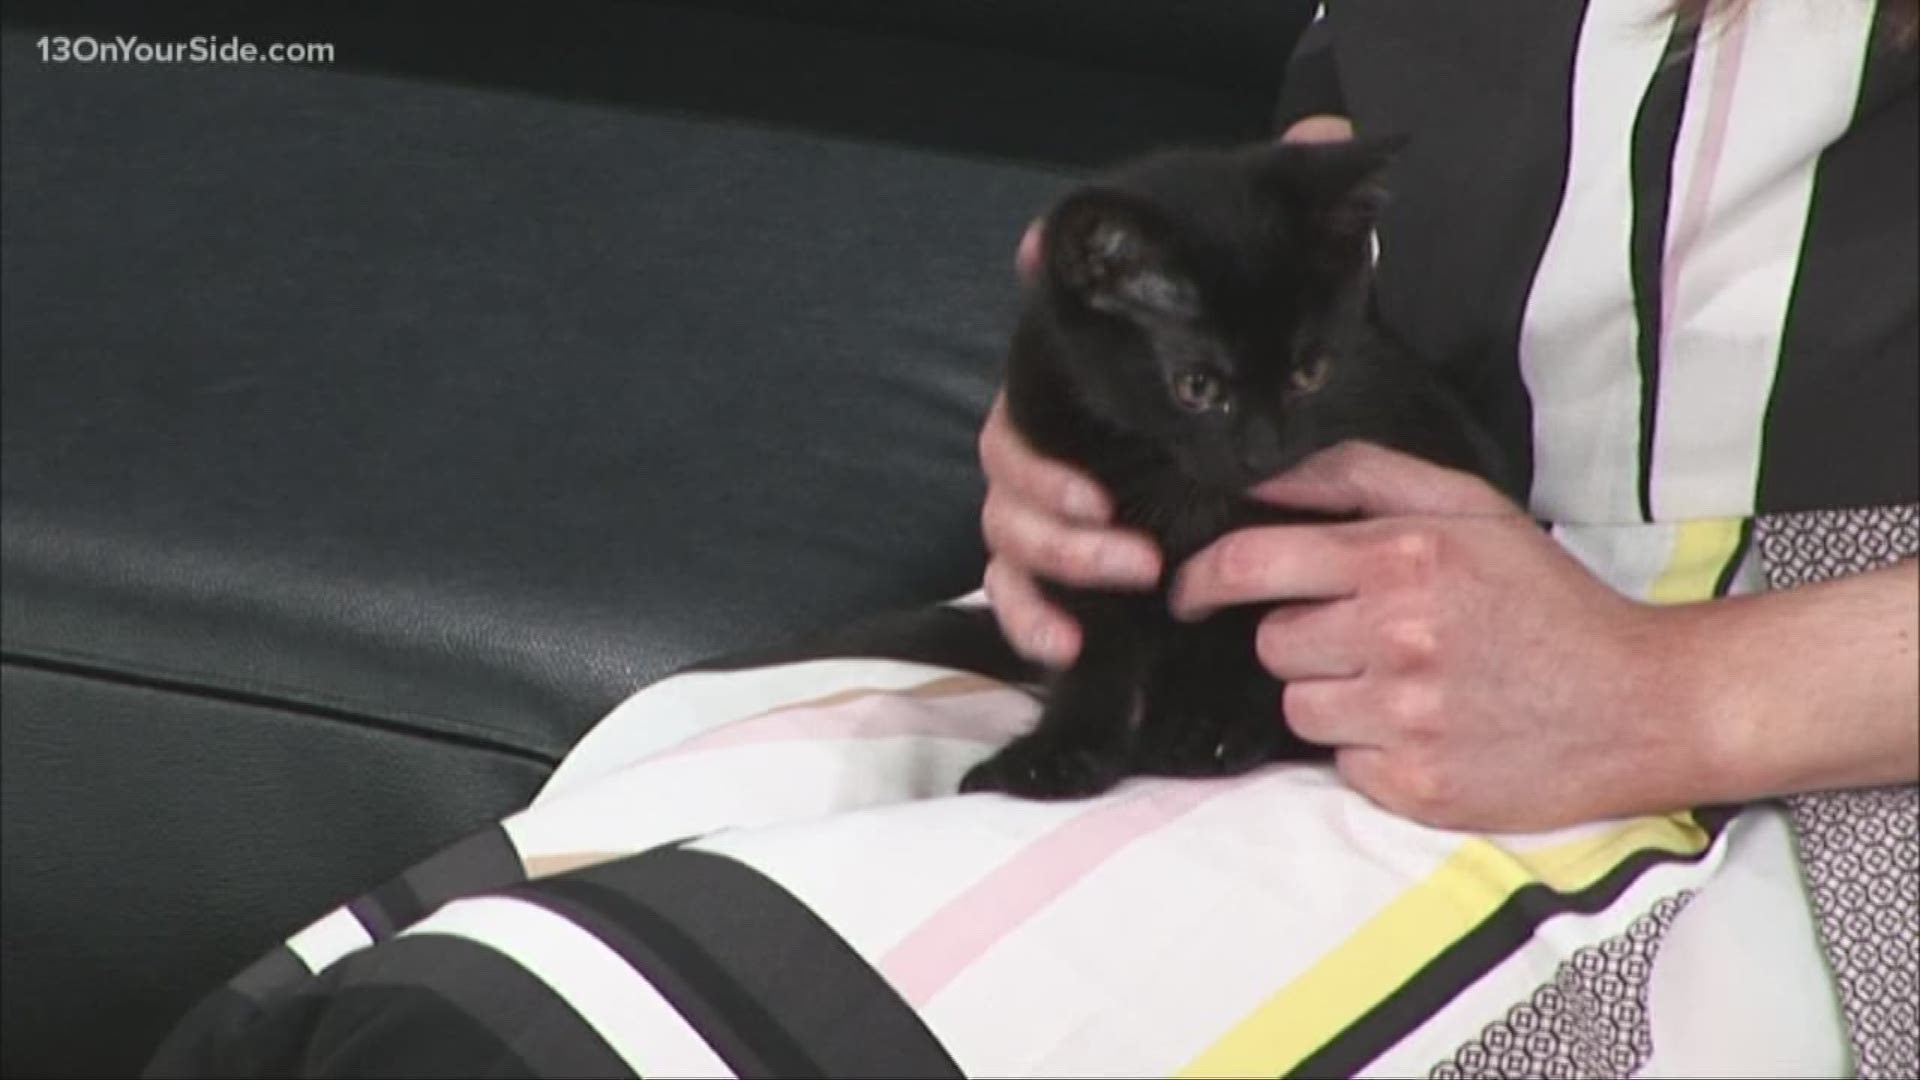 This week's Adopt-A-Pet is a 2-month-old kitten named Sheryl. It's actually kitten season and it's a popular time to get a furry friend.